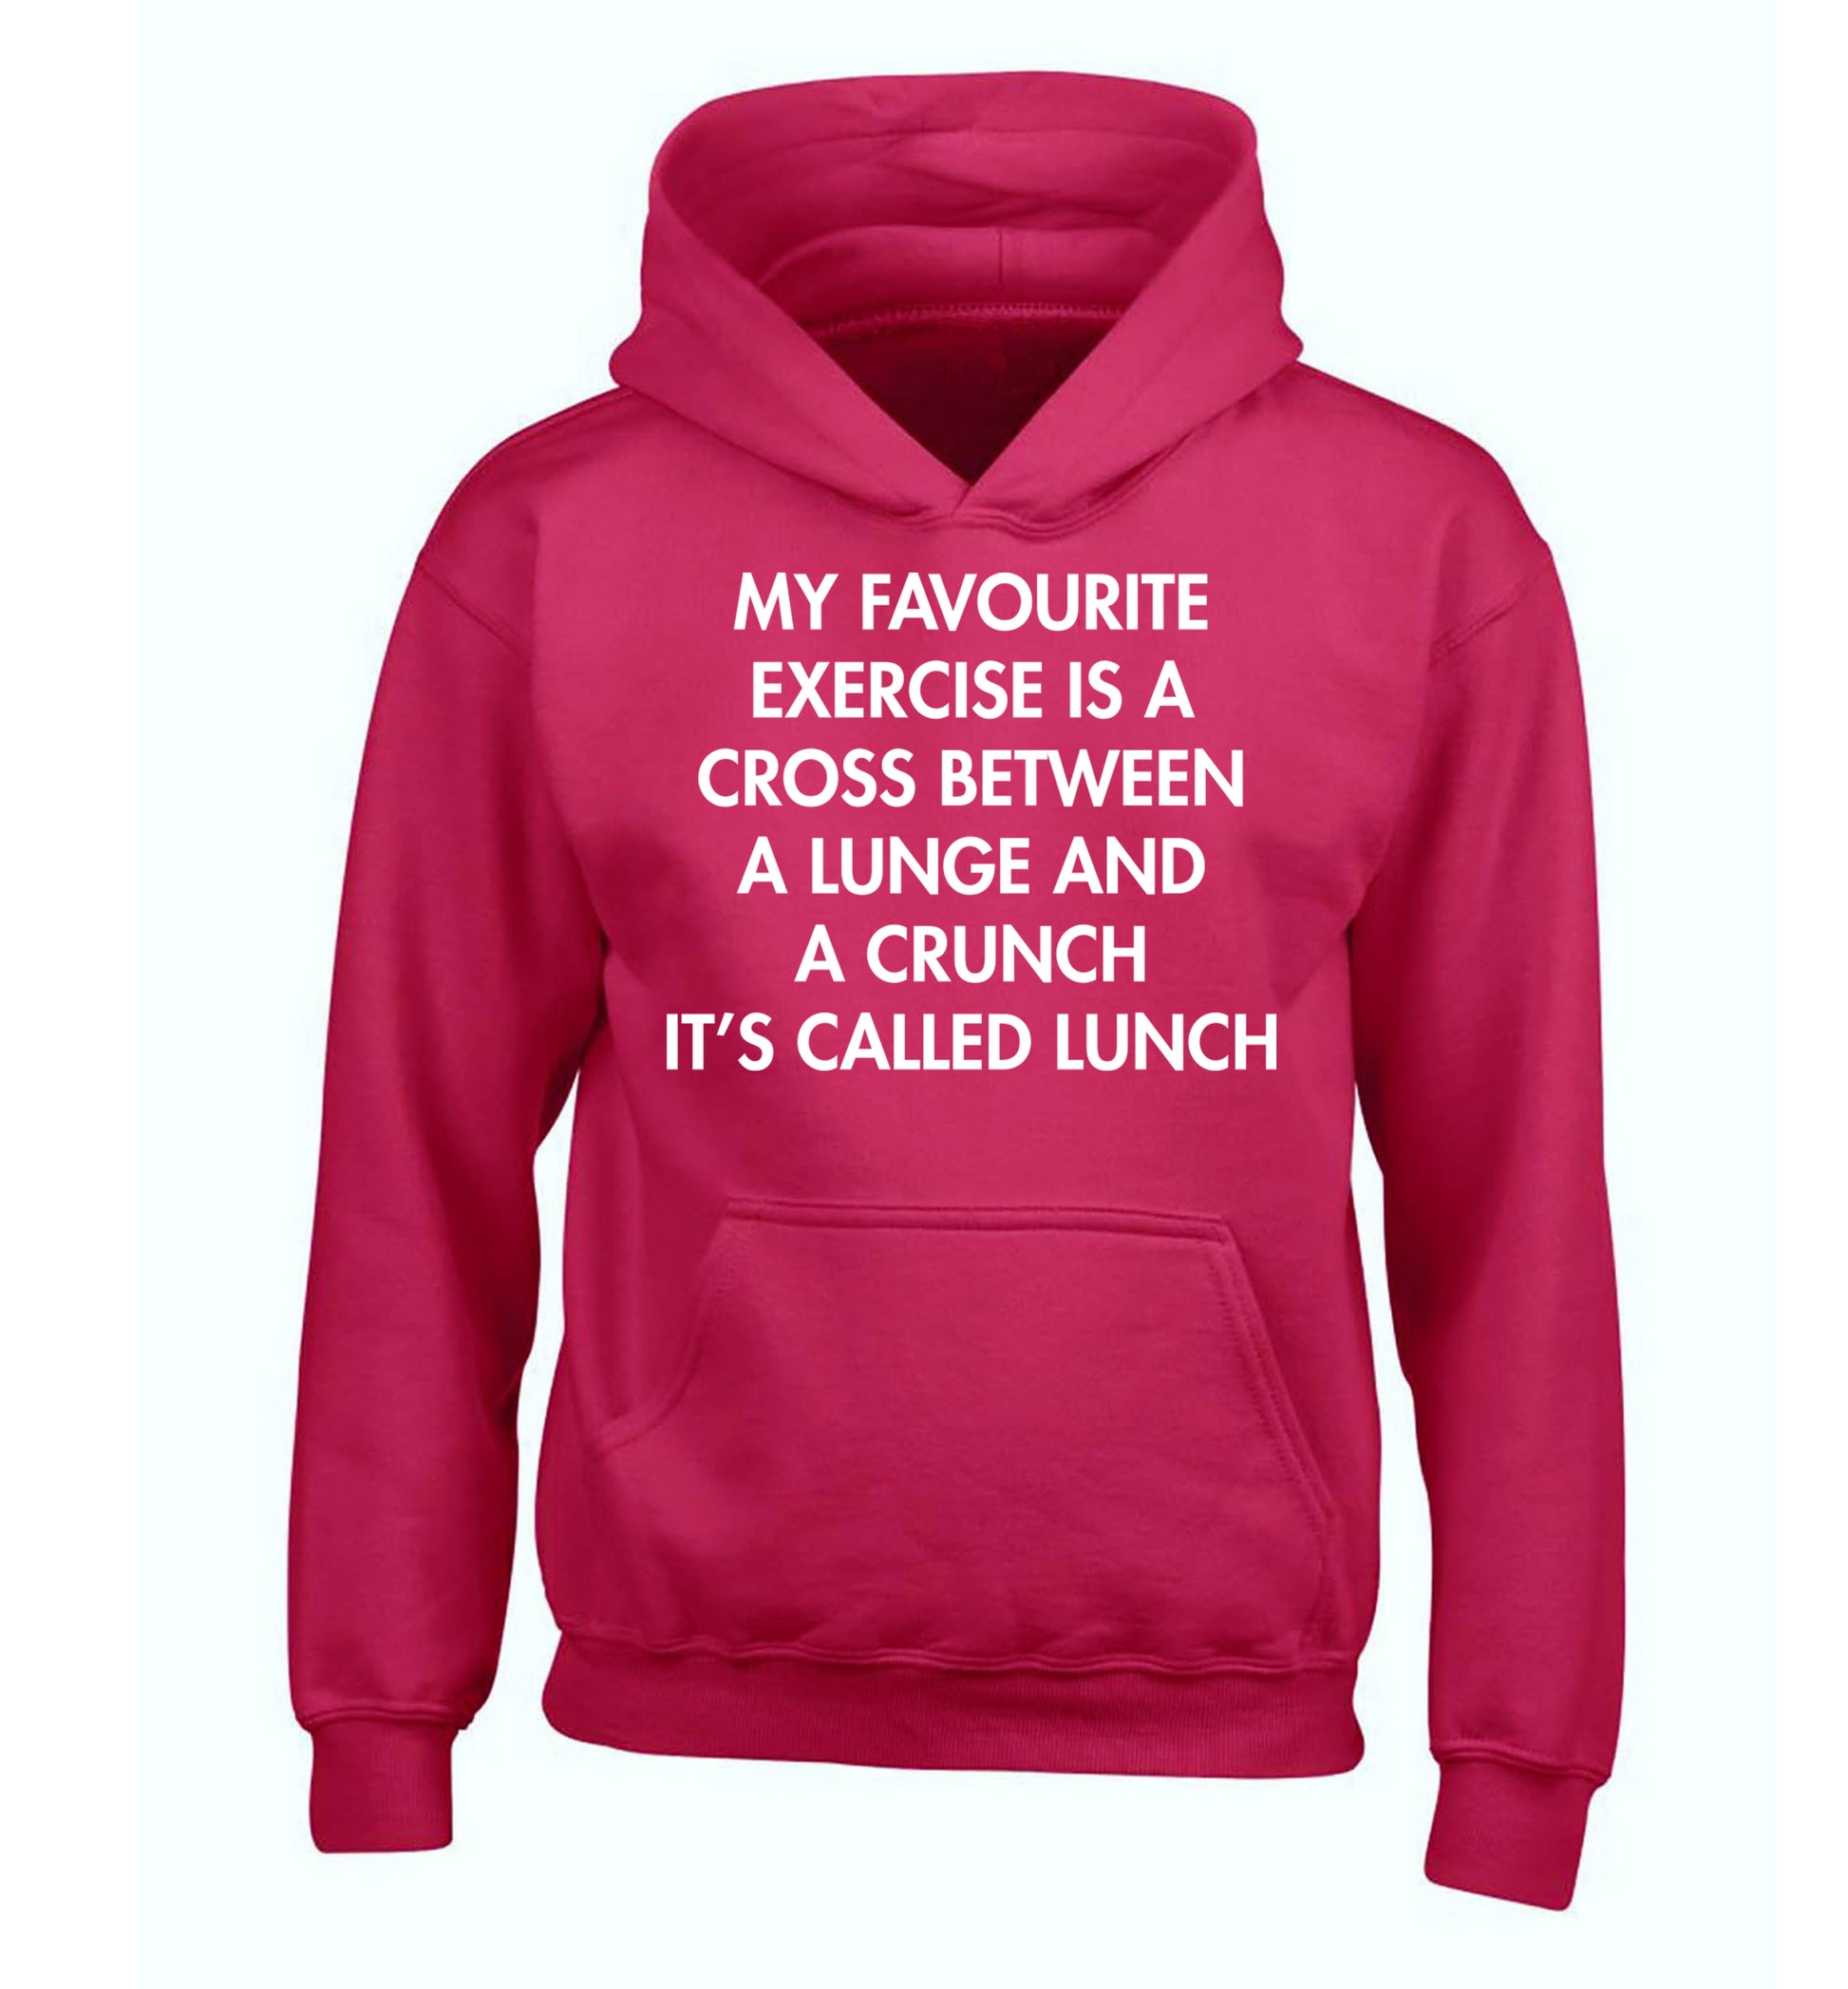 My favourite exercise is a cross between a lung and a crunch it's called lunch children's pink hoodie 12-14 Years